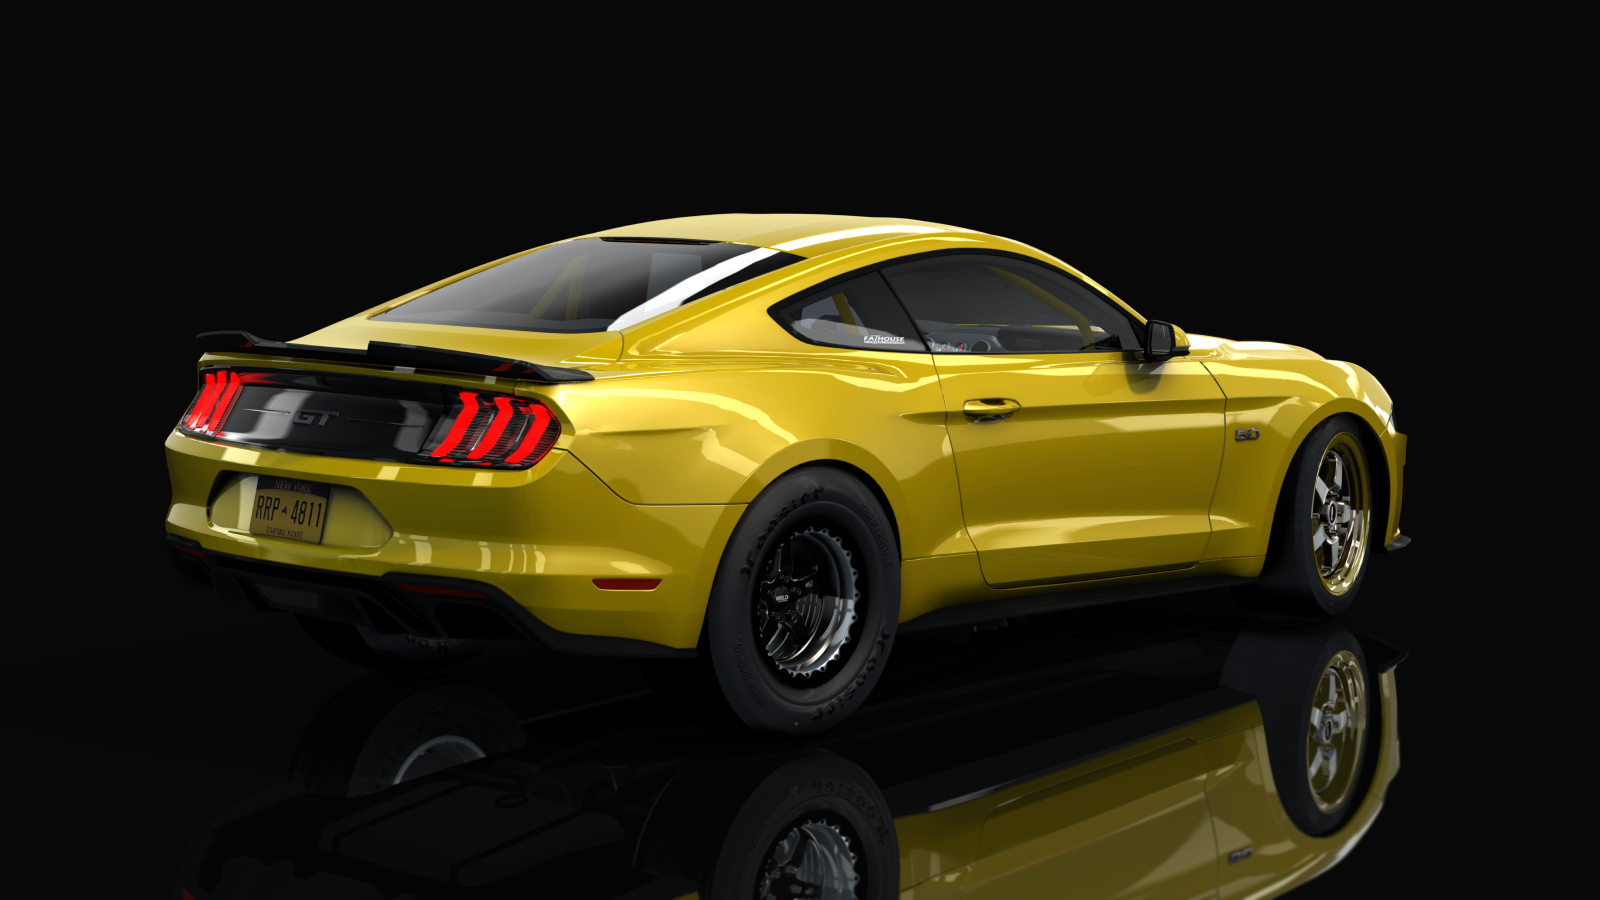 Ford Mustang GT 2018 1500Rx, skin Yellow_Peel